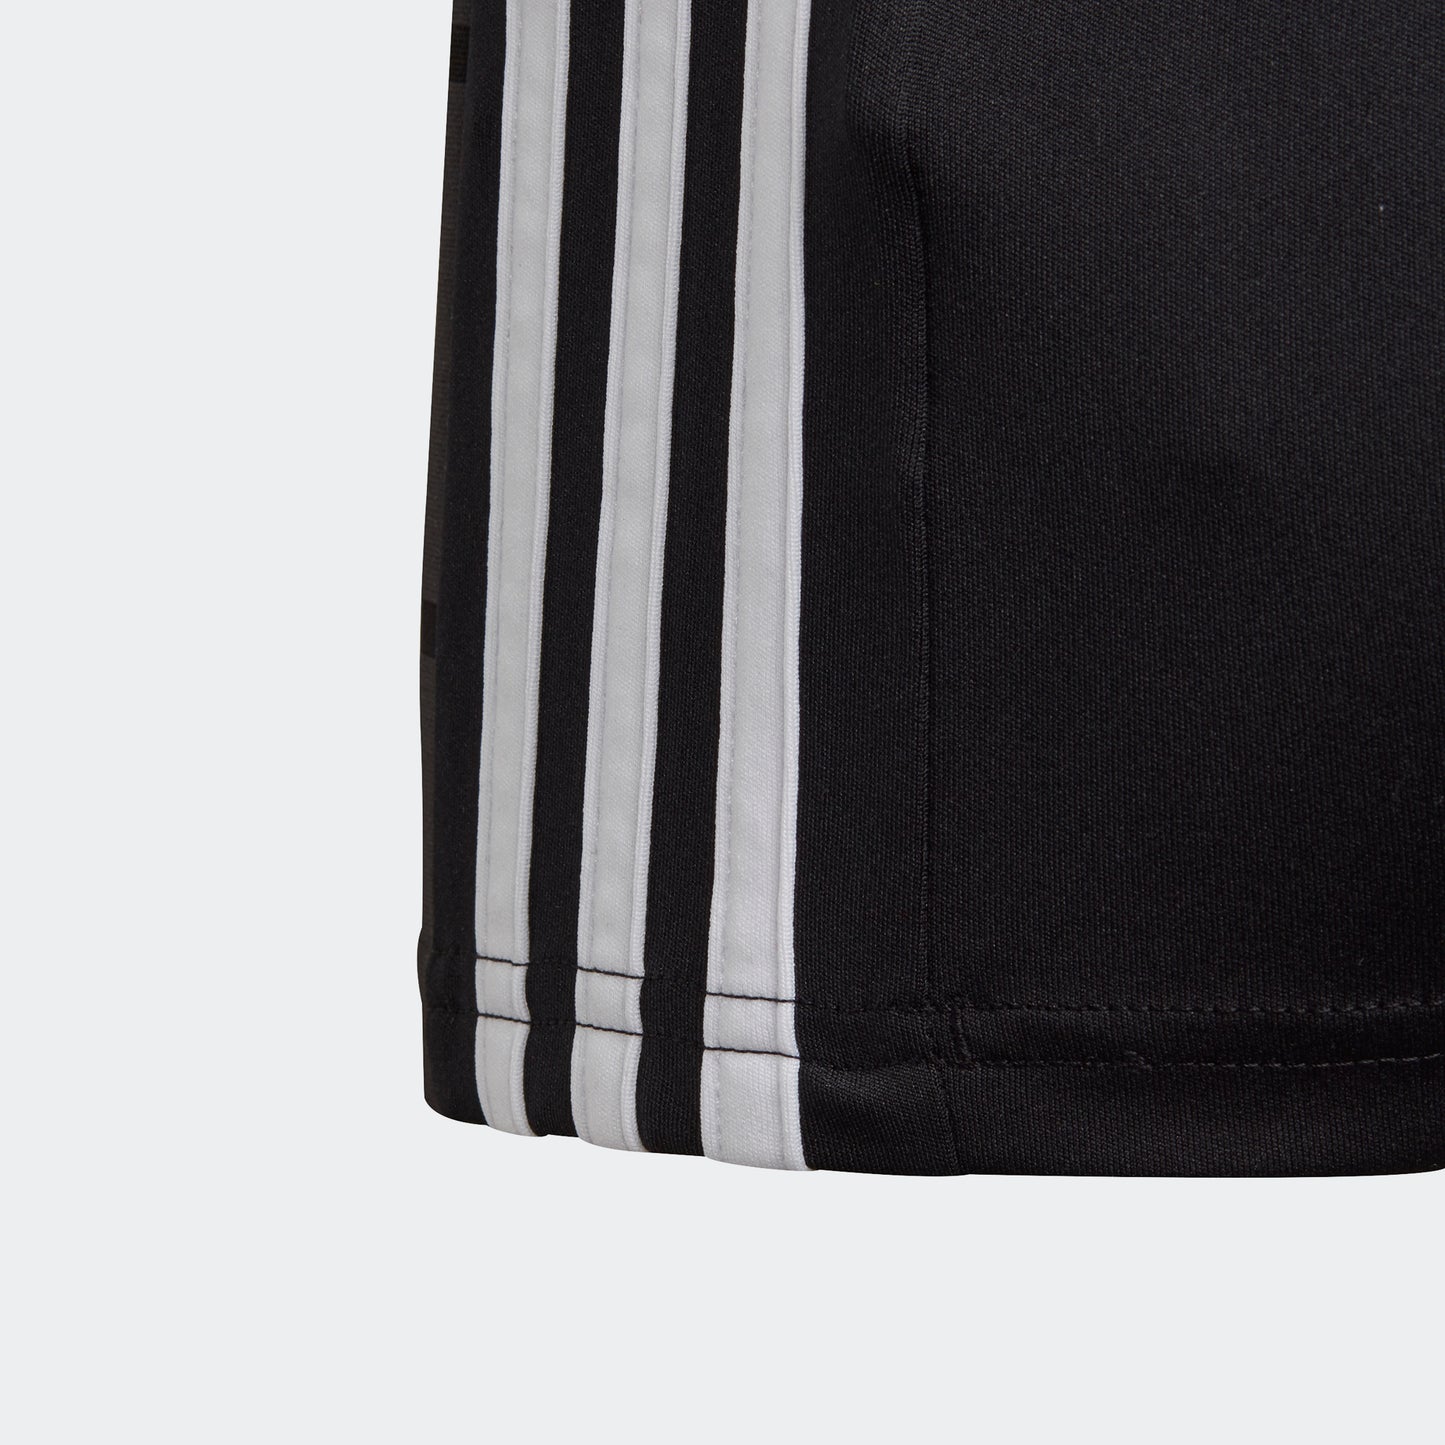 adidas CAMPEON 21 Soccer Jersey | Black | Youth